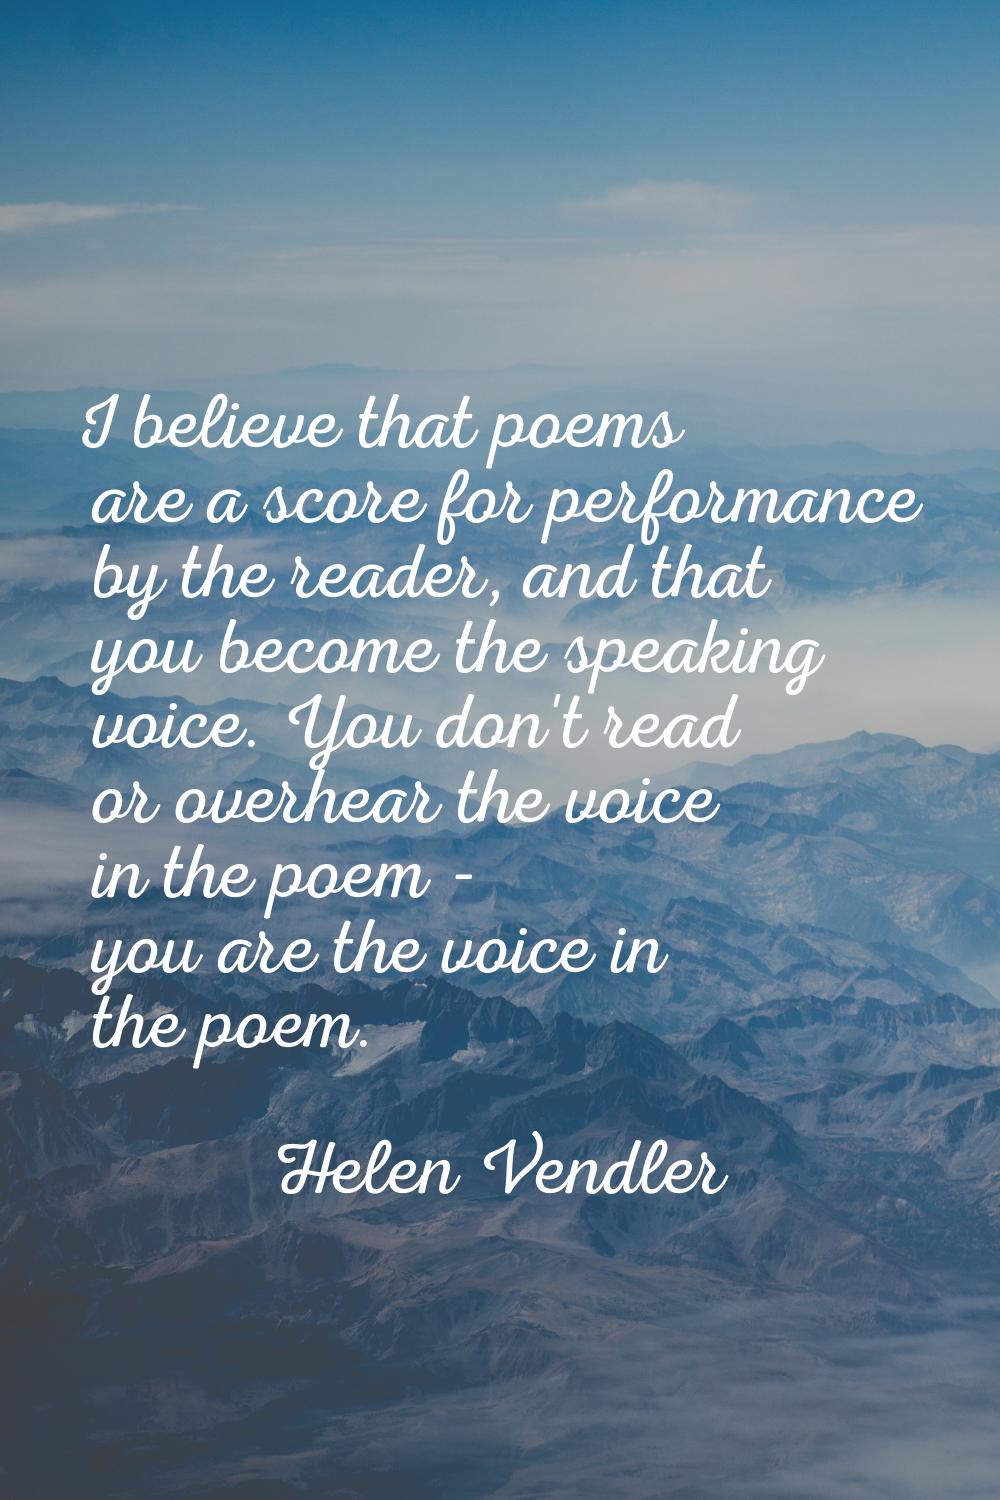 I believe that poems are a score for performance by the reader, and that you become the speaking vo